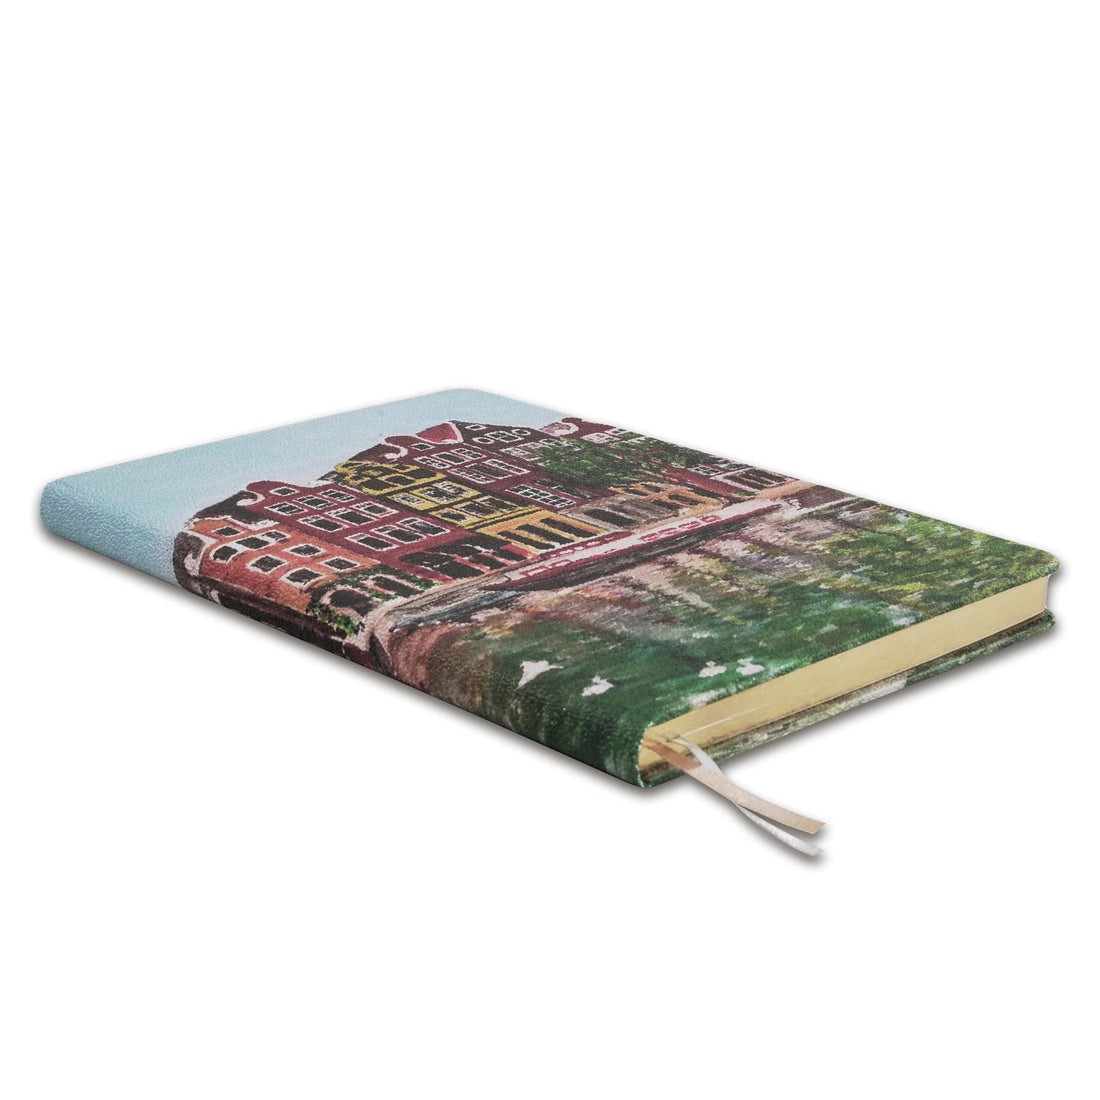 CANAL HOUSE, Dreamscape Collection, A5 Hardcover Diary, Lined